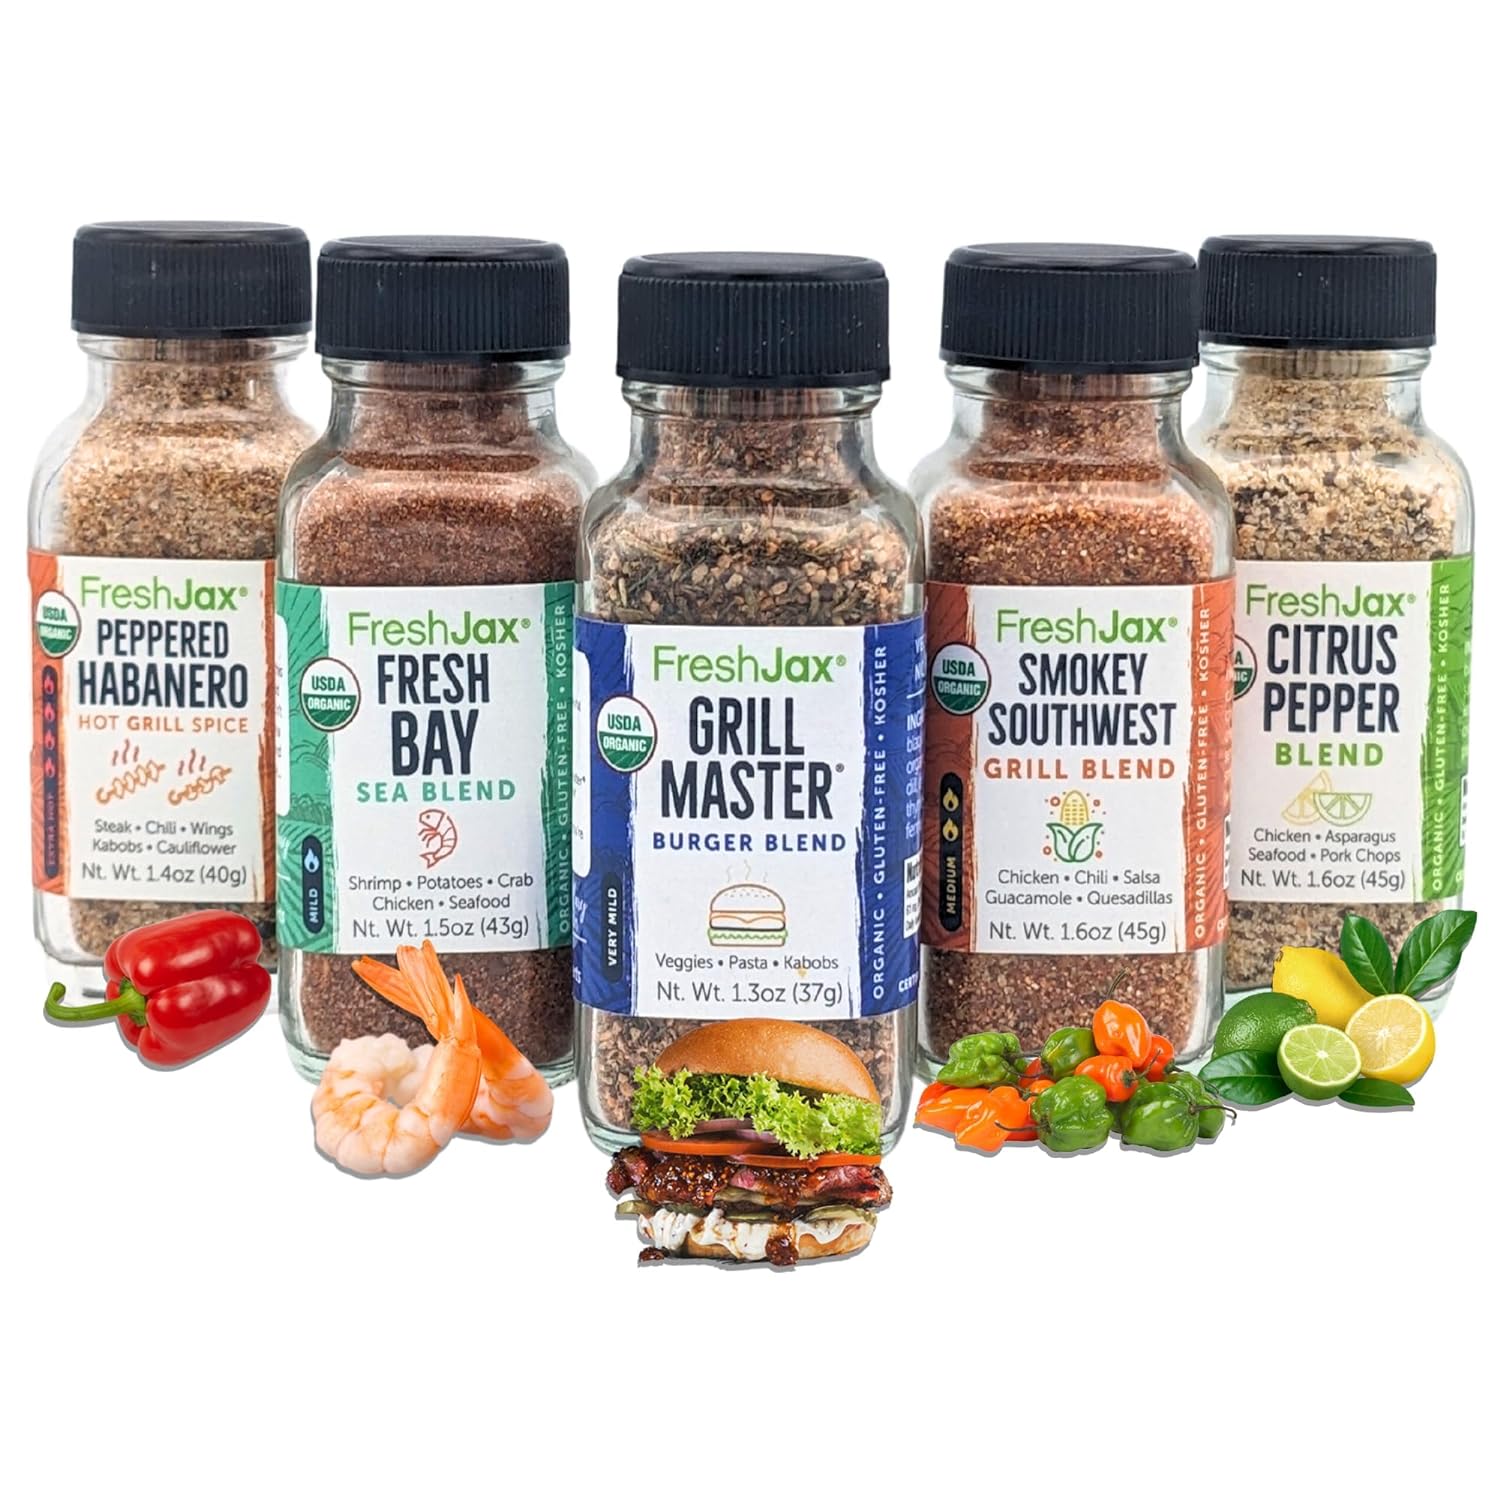 FreshJax Grill Seasoning Gift Set | Pack of 5 Organic Grilling Spices | Grilling Gifts for Dads, Father | BBQ Grill Spices and Seasoning Sets Packed in a Giftable Box